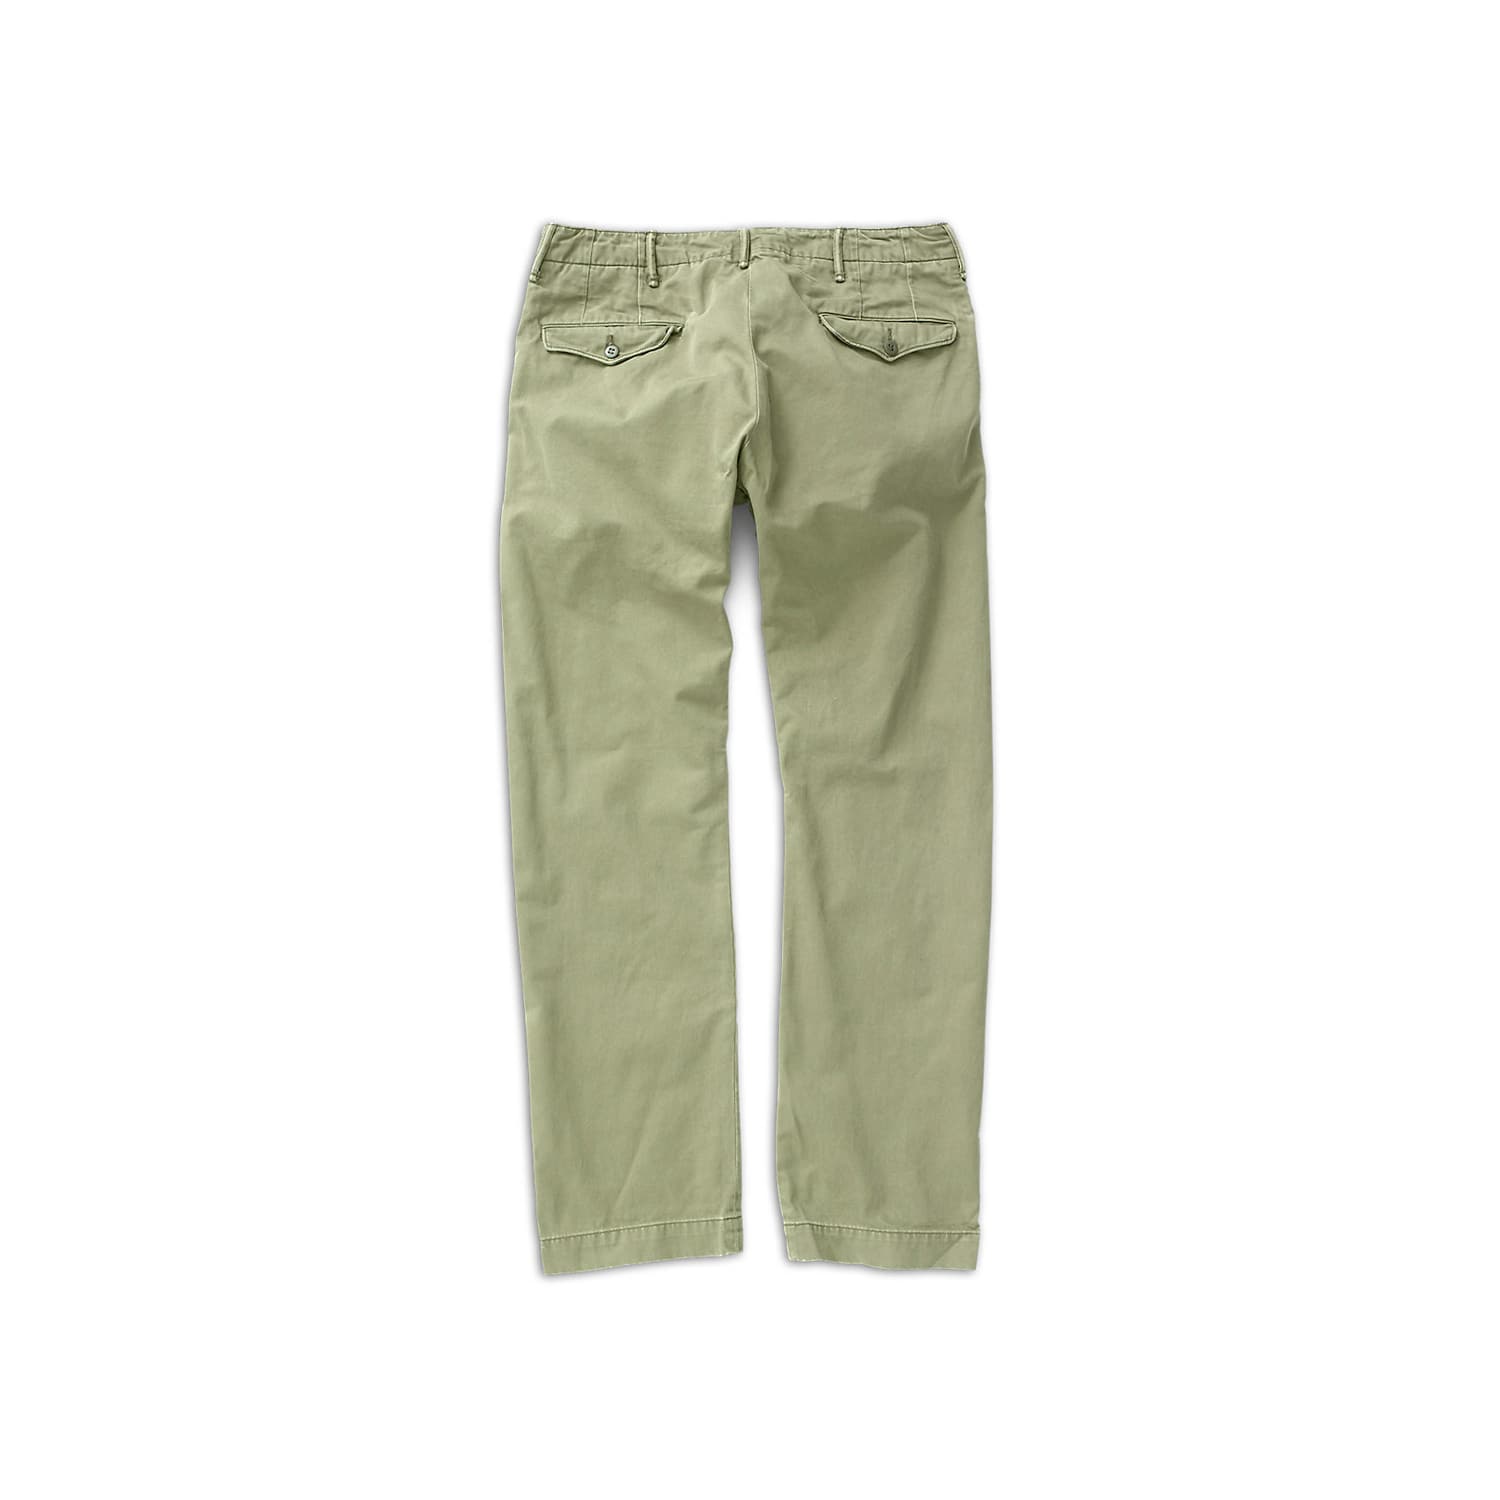 RRL Chino Pant Olive FINAL SALE